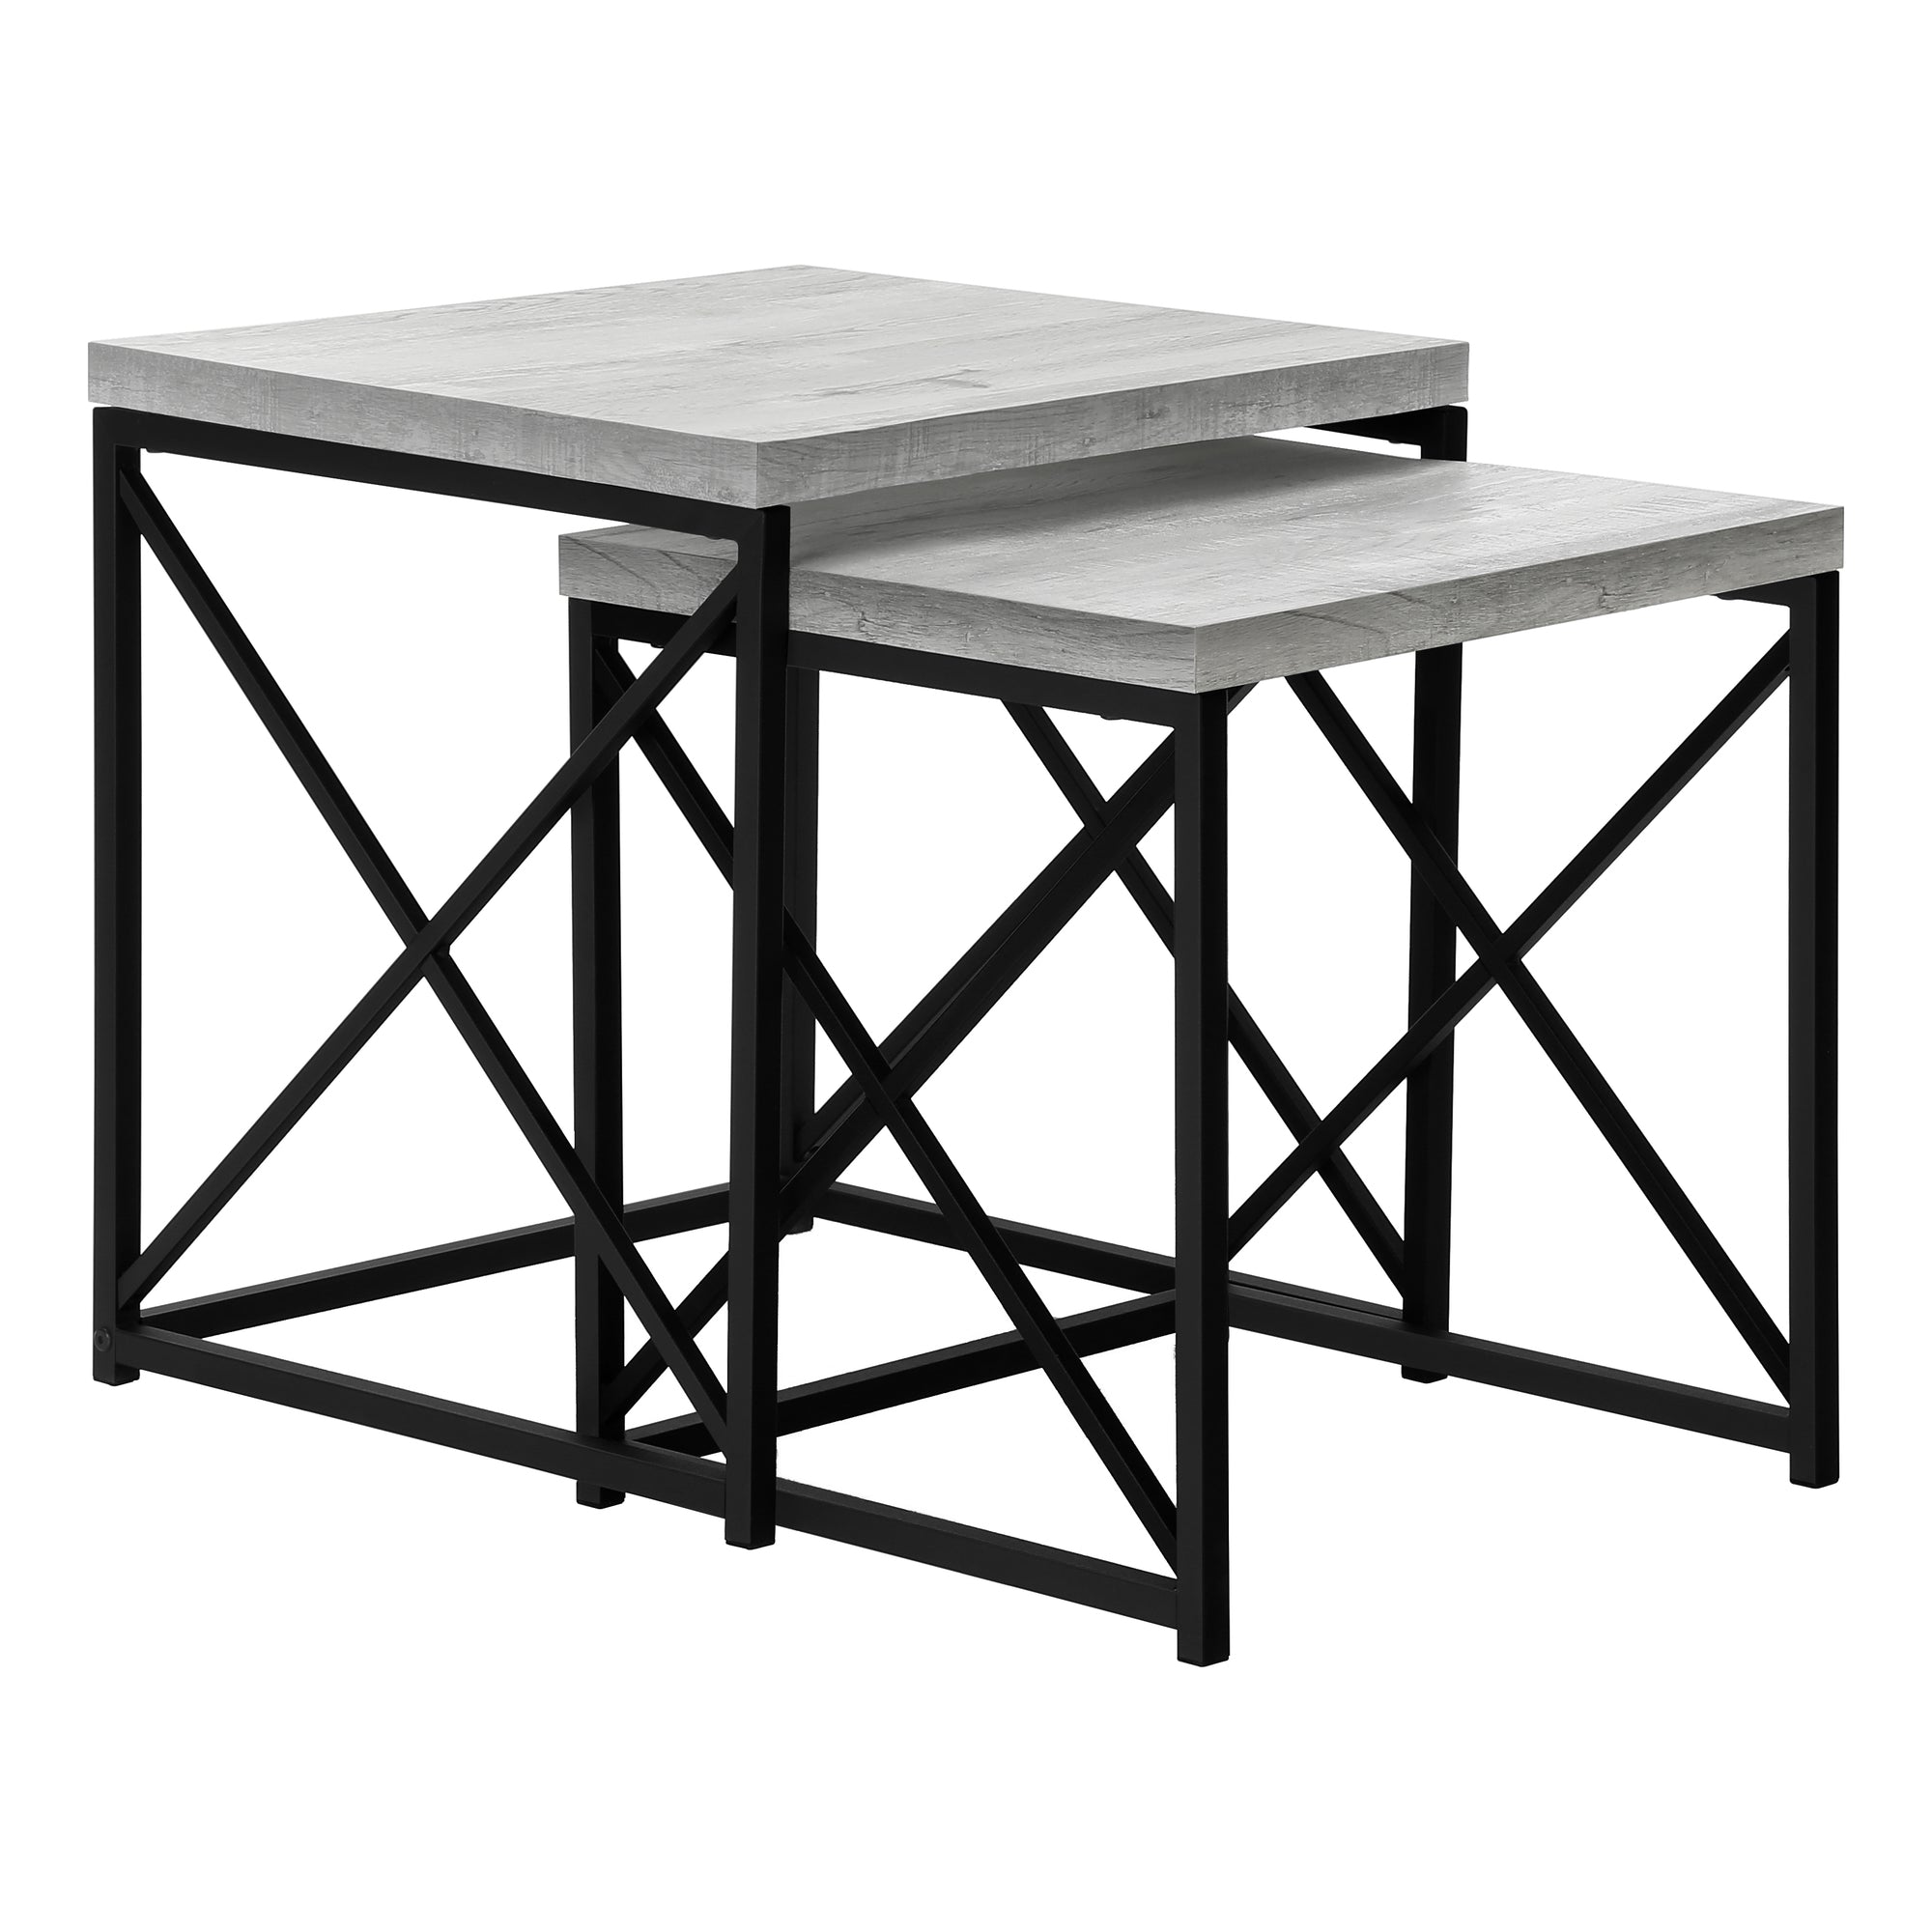 MN-543414    Nesting Table, Set Of 2, Side, End, Metal, Accent, Living Room, Bedroom, Metal Base, Laminate, Grey Reclaimed Wood Look, Black, Contemporary, Modern